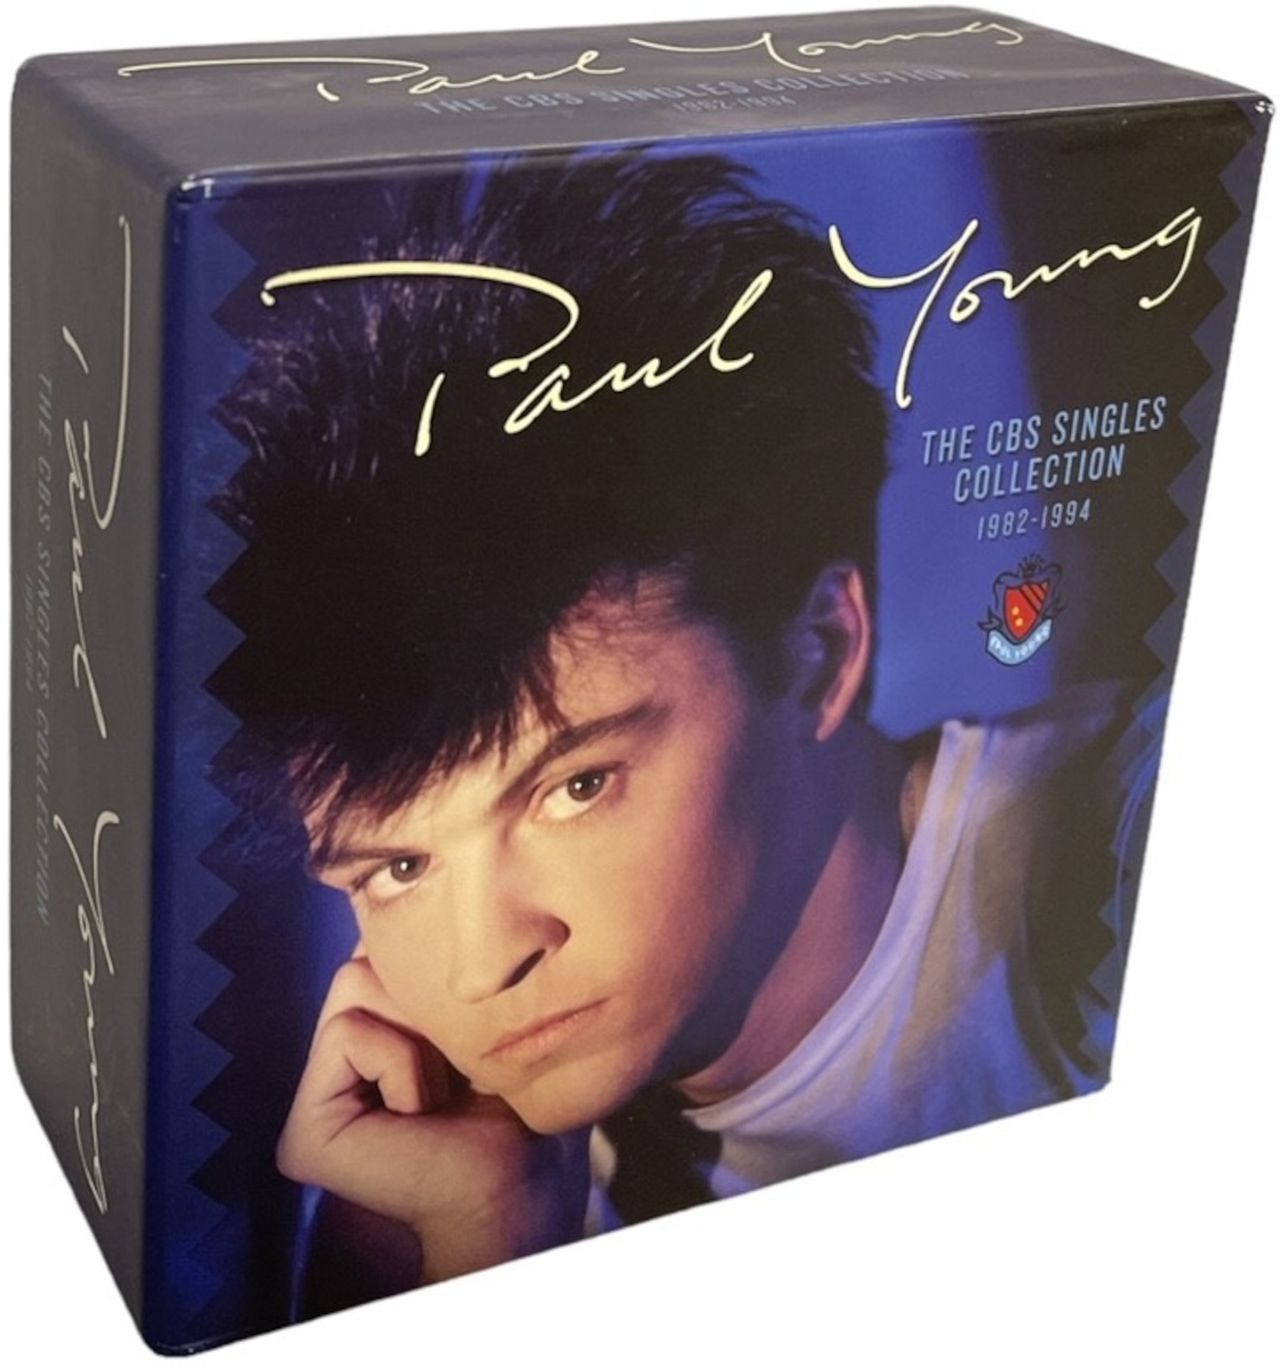 Paul Young The CBS Singles Collection 1982-1994 UK Cd single boxset ...